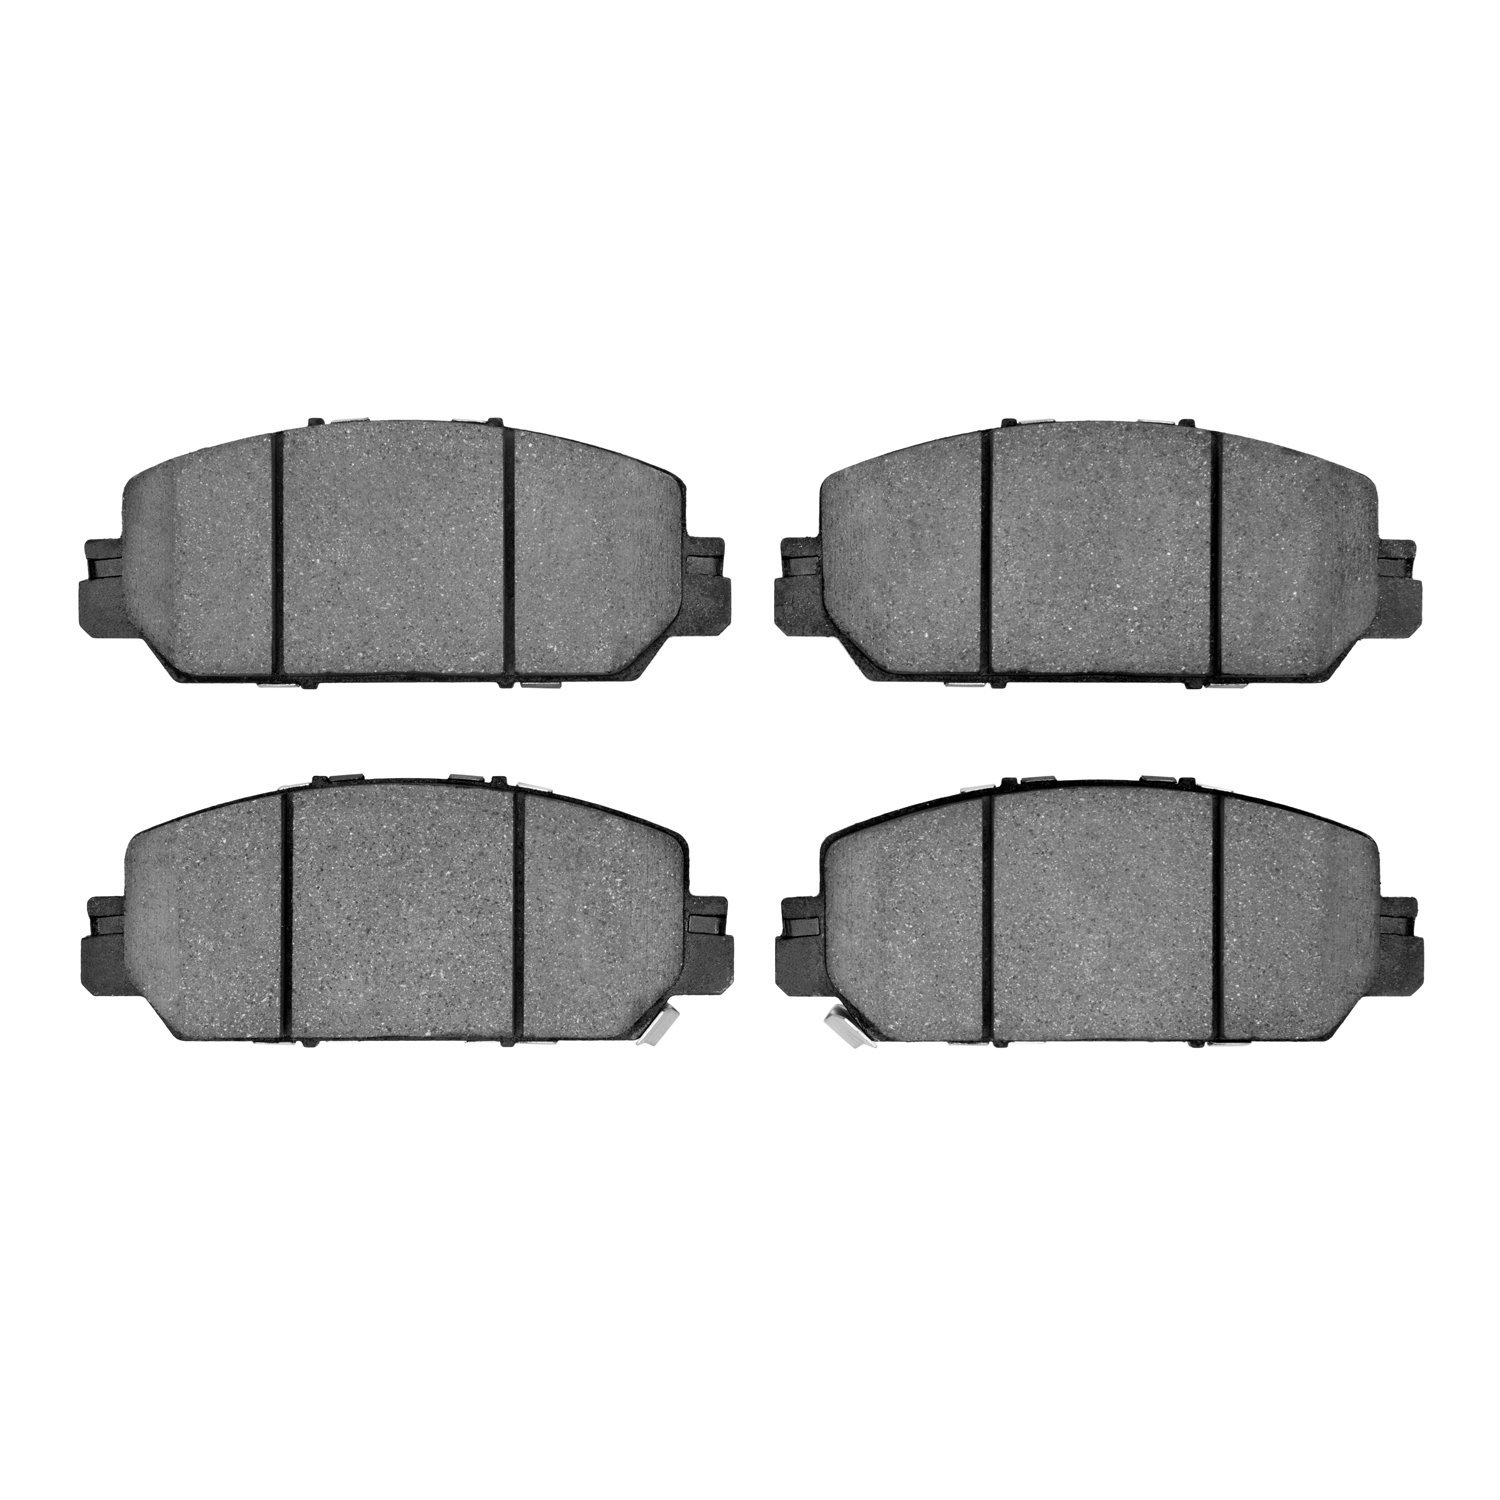 1552-2036-00 5000 Advanced Ceramic Brake Pads, Fits Select Acura/Honda, Position: Front